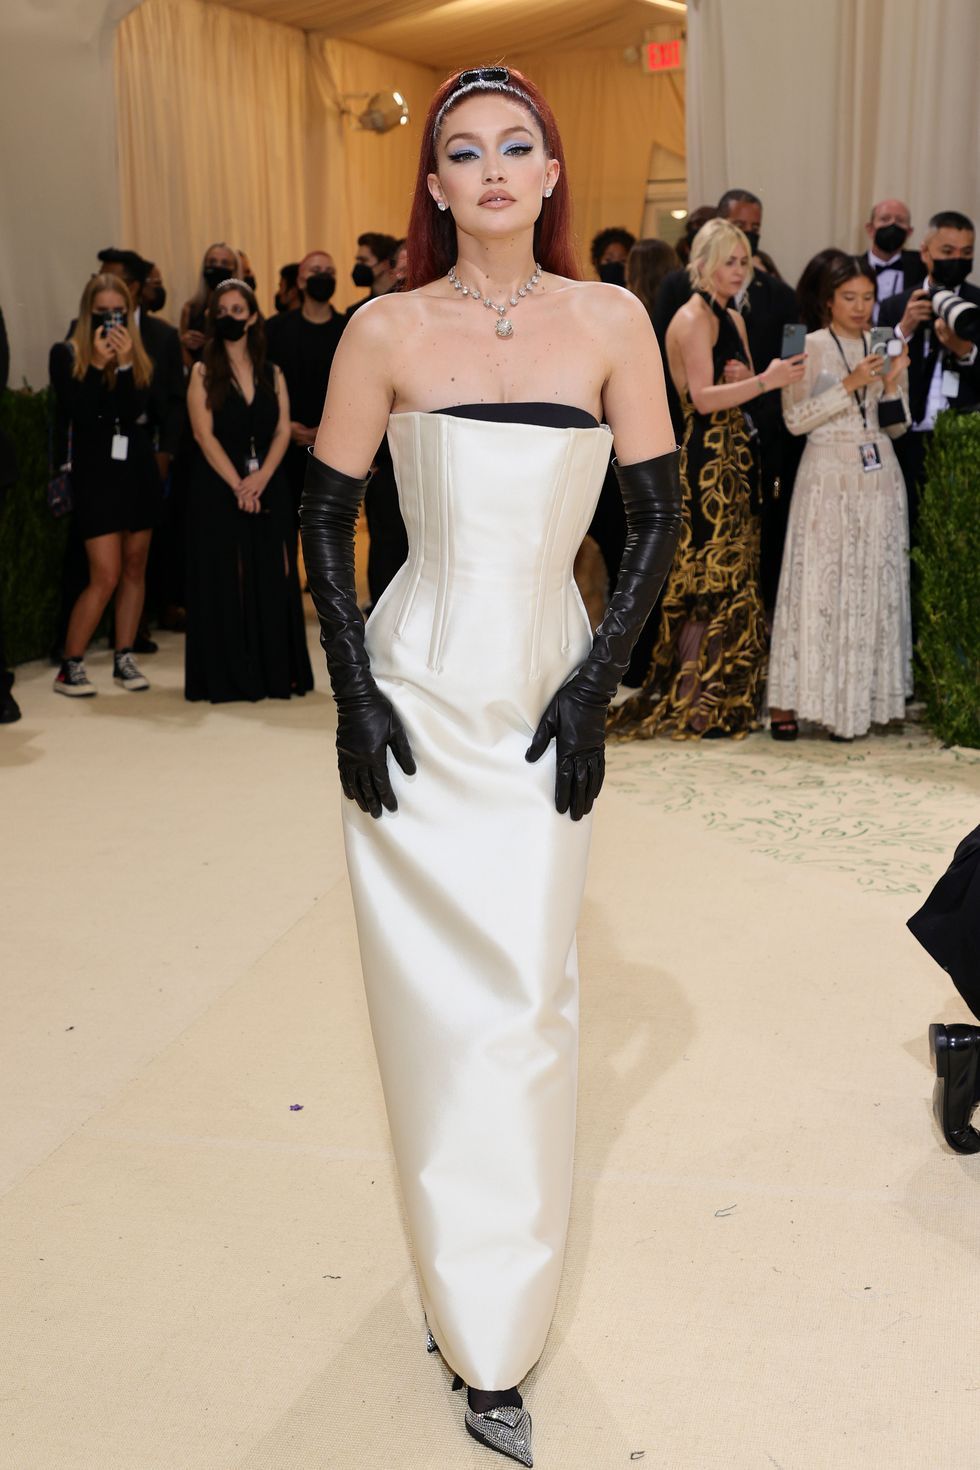 Met Gala 2021 Red Carpet: All the Celebrity Dresses, Outfits, and Looks —  See Photos